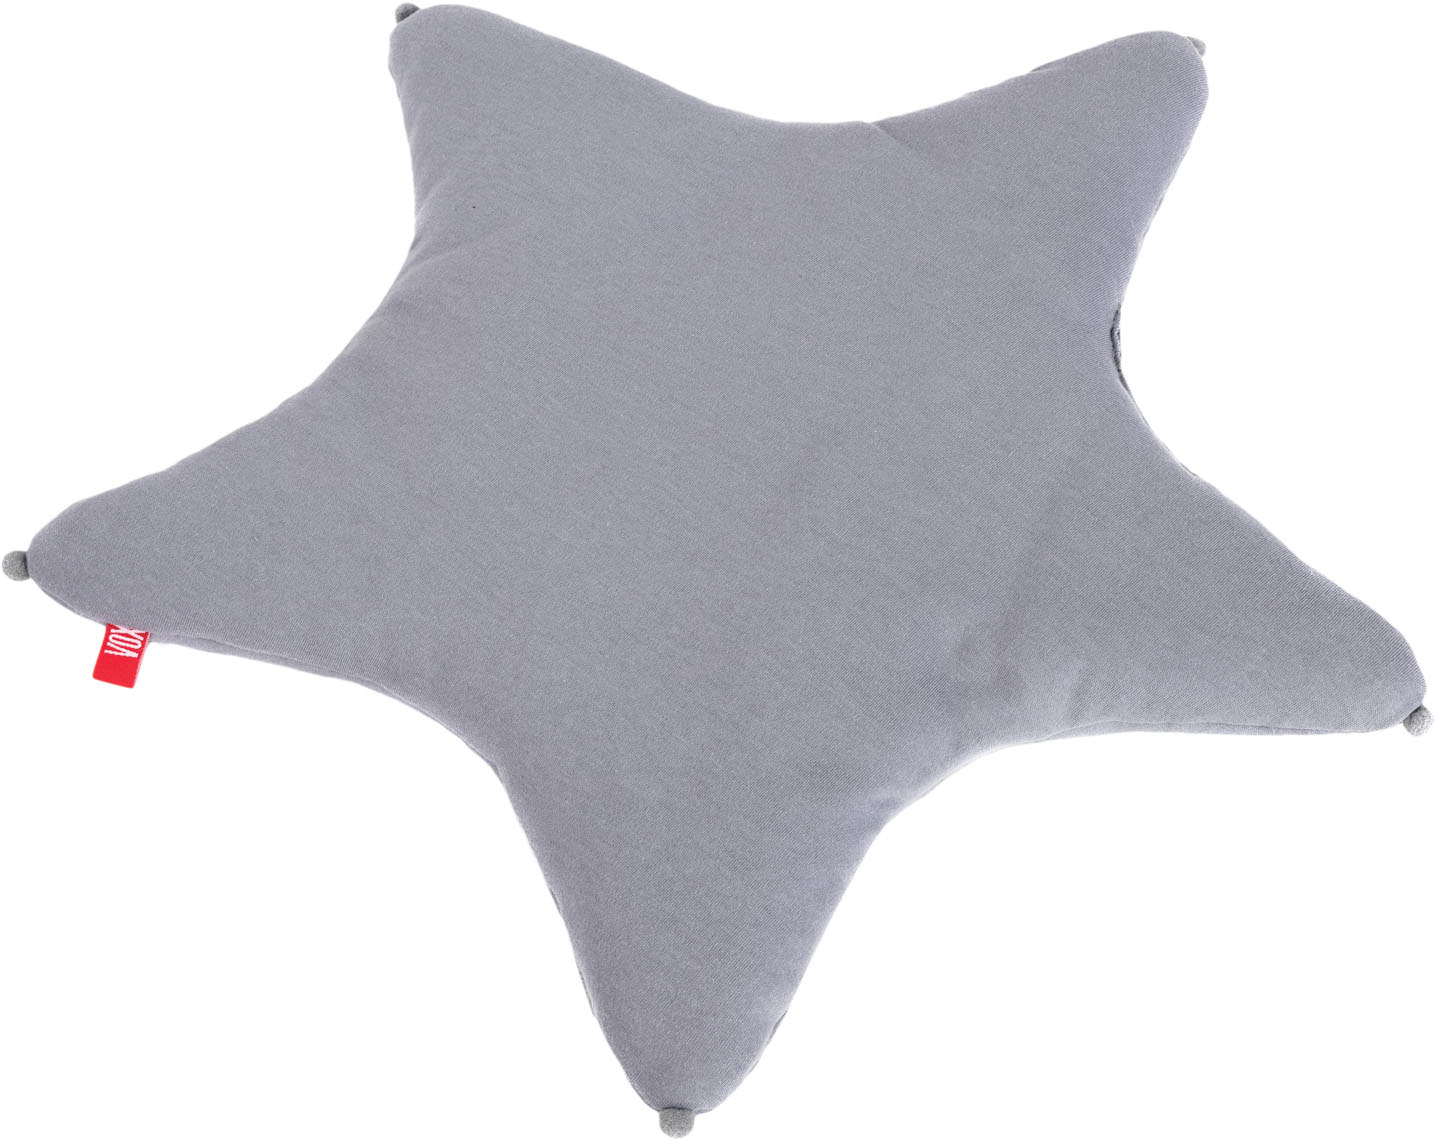 Pillow Star PURE grey